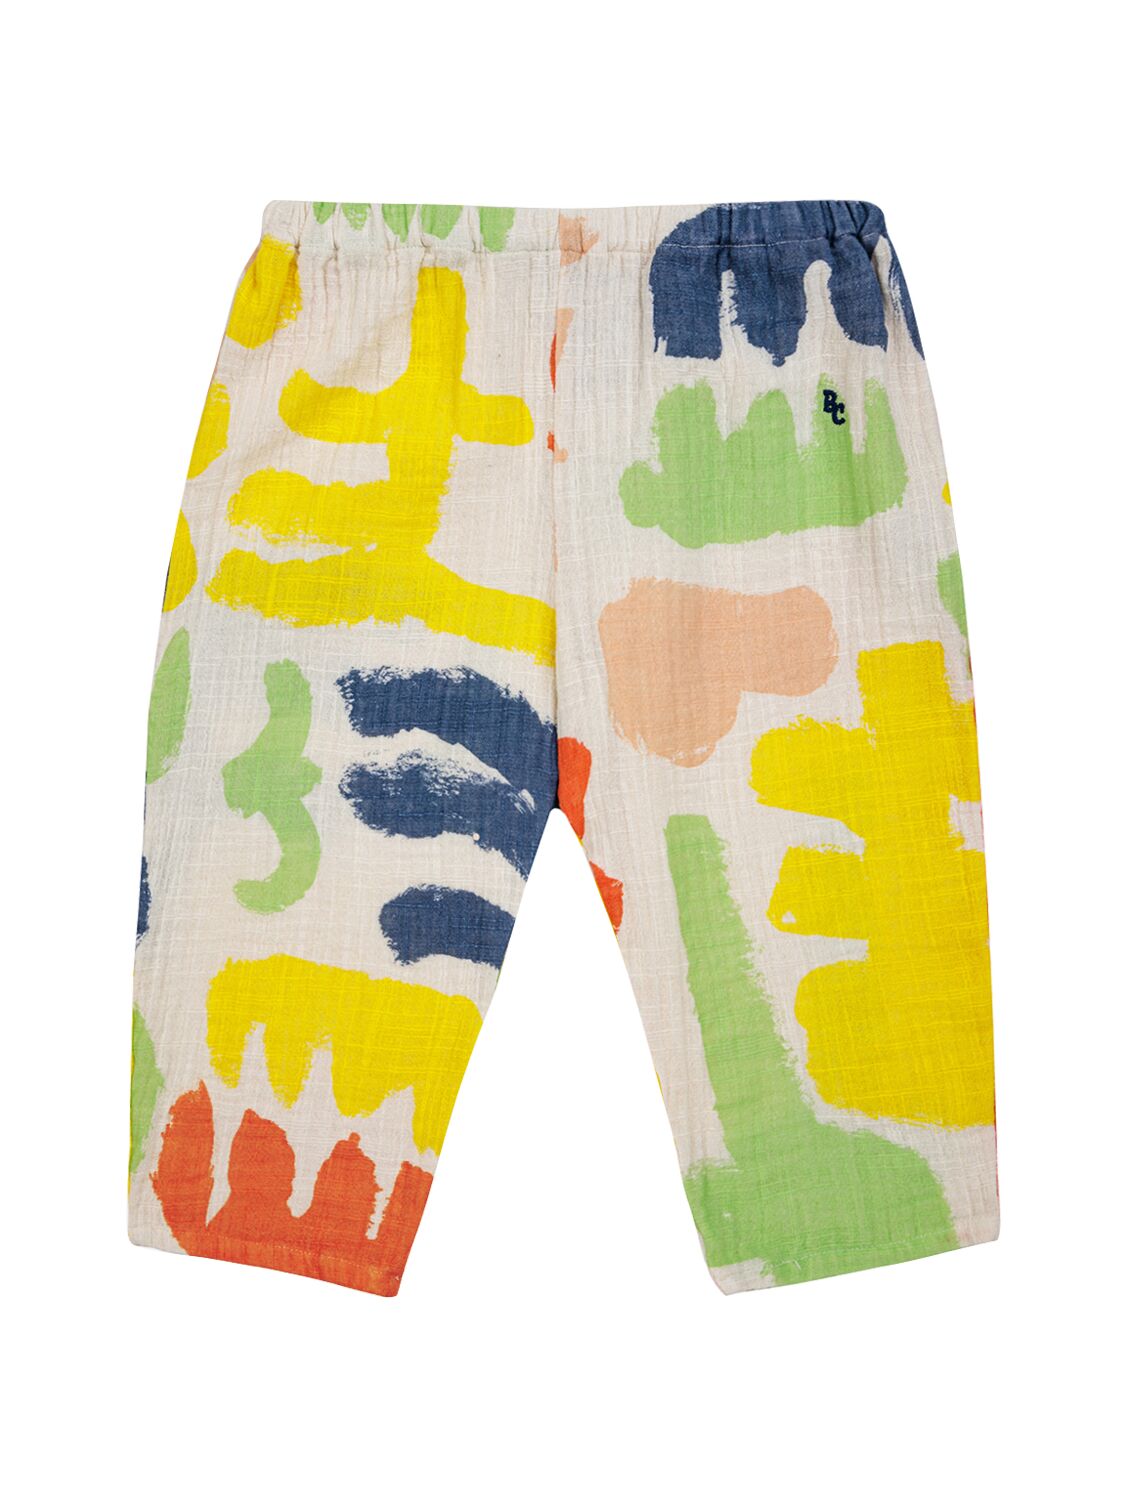 Bobo Choses Babies' Printed Woven Cotton Pants In Multi